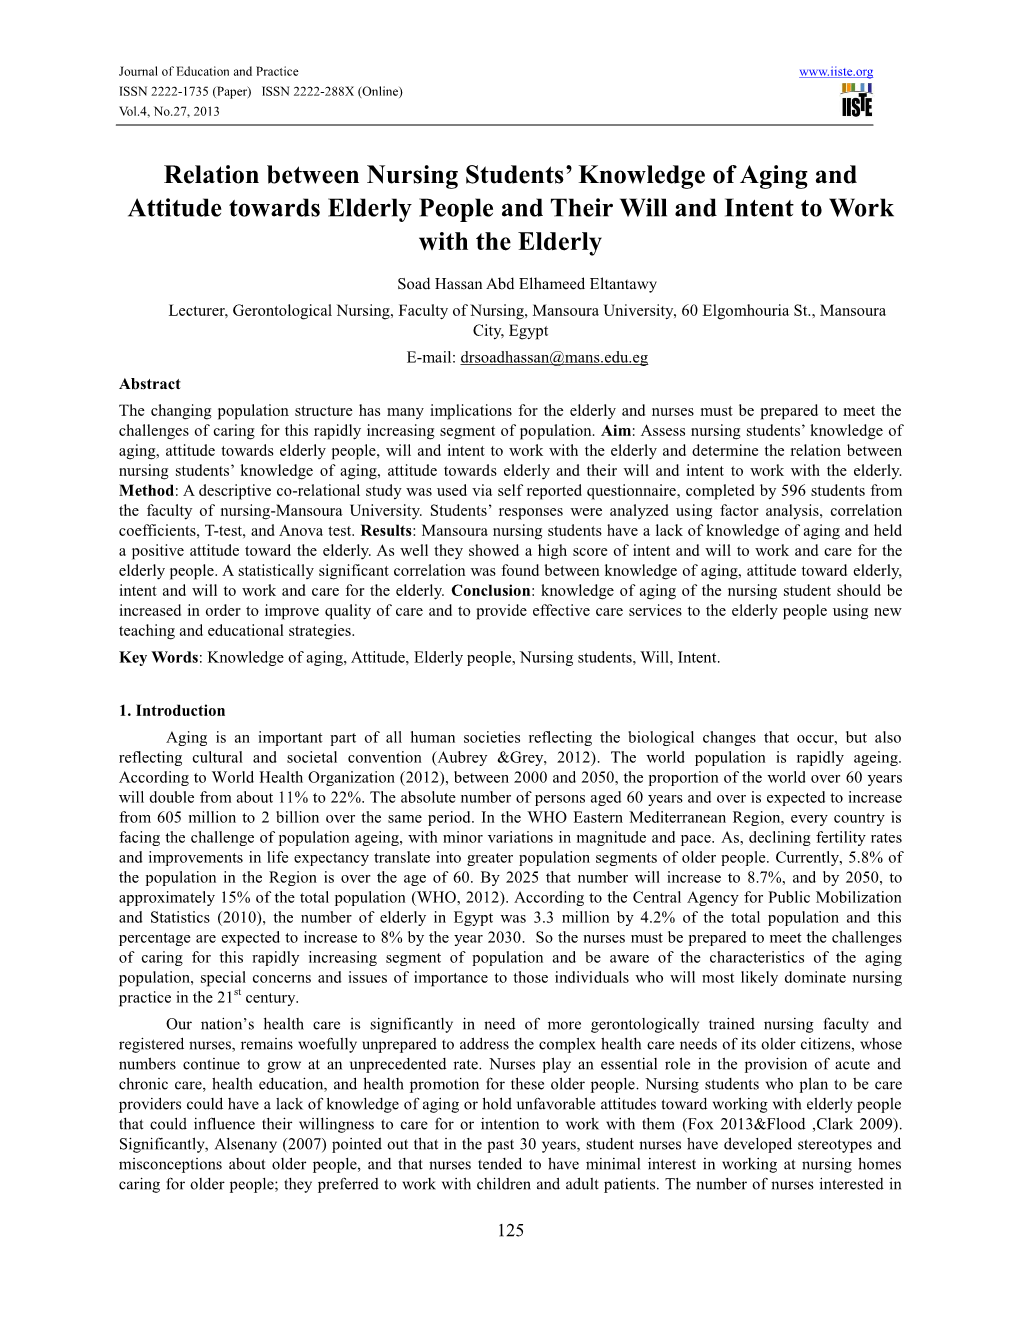 Relation Between Nursing Students' Knowledge of Aging and Attitude Towards Elderly People and Their Will and Intent to Work Wi